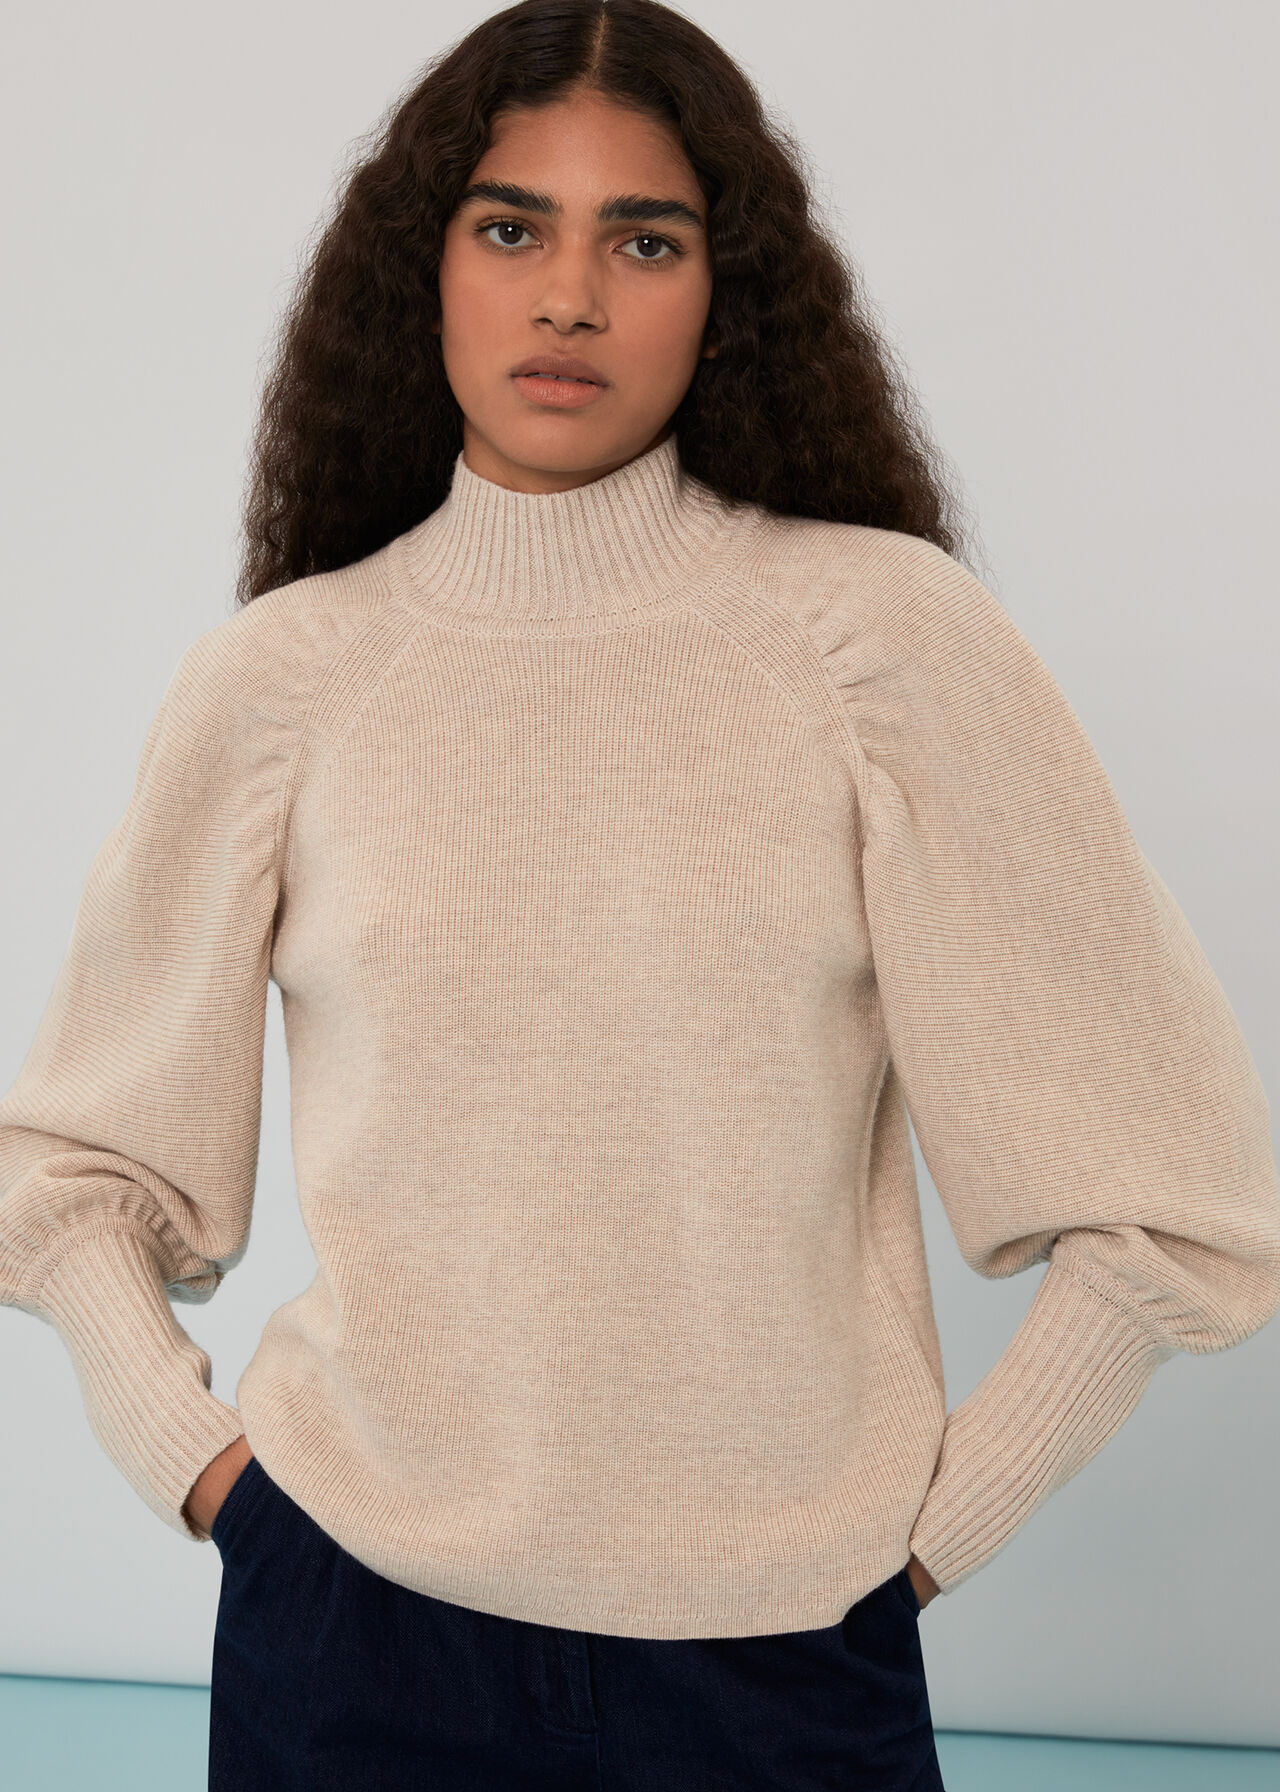 Beige Sleeve Detail Fashioned Knit | WHISTLES